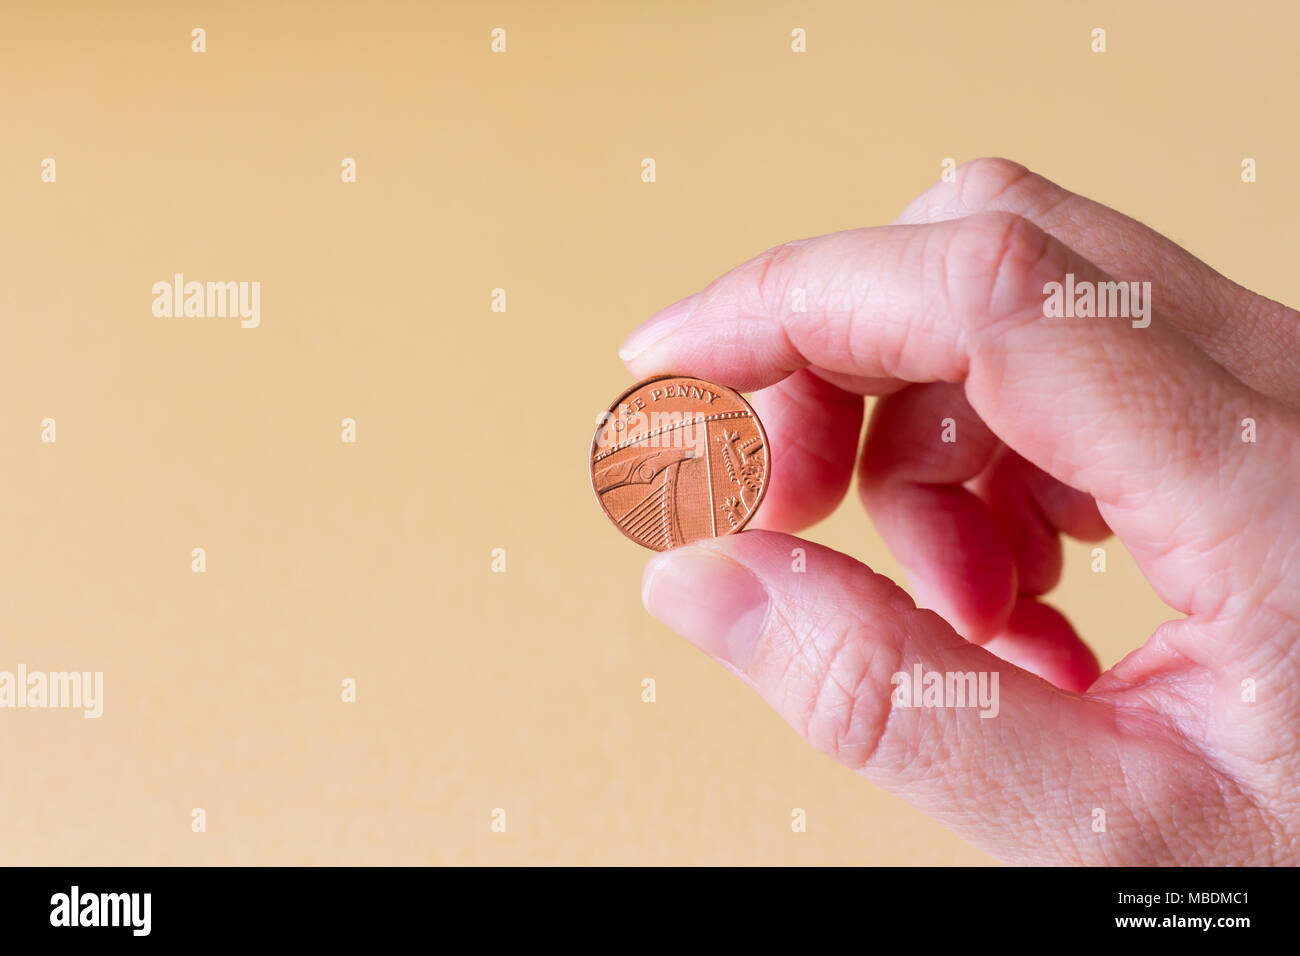 Female hand holding a one penny, one pence British sterling coin Stock Photo